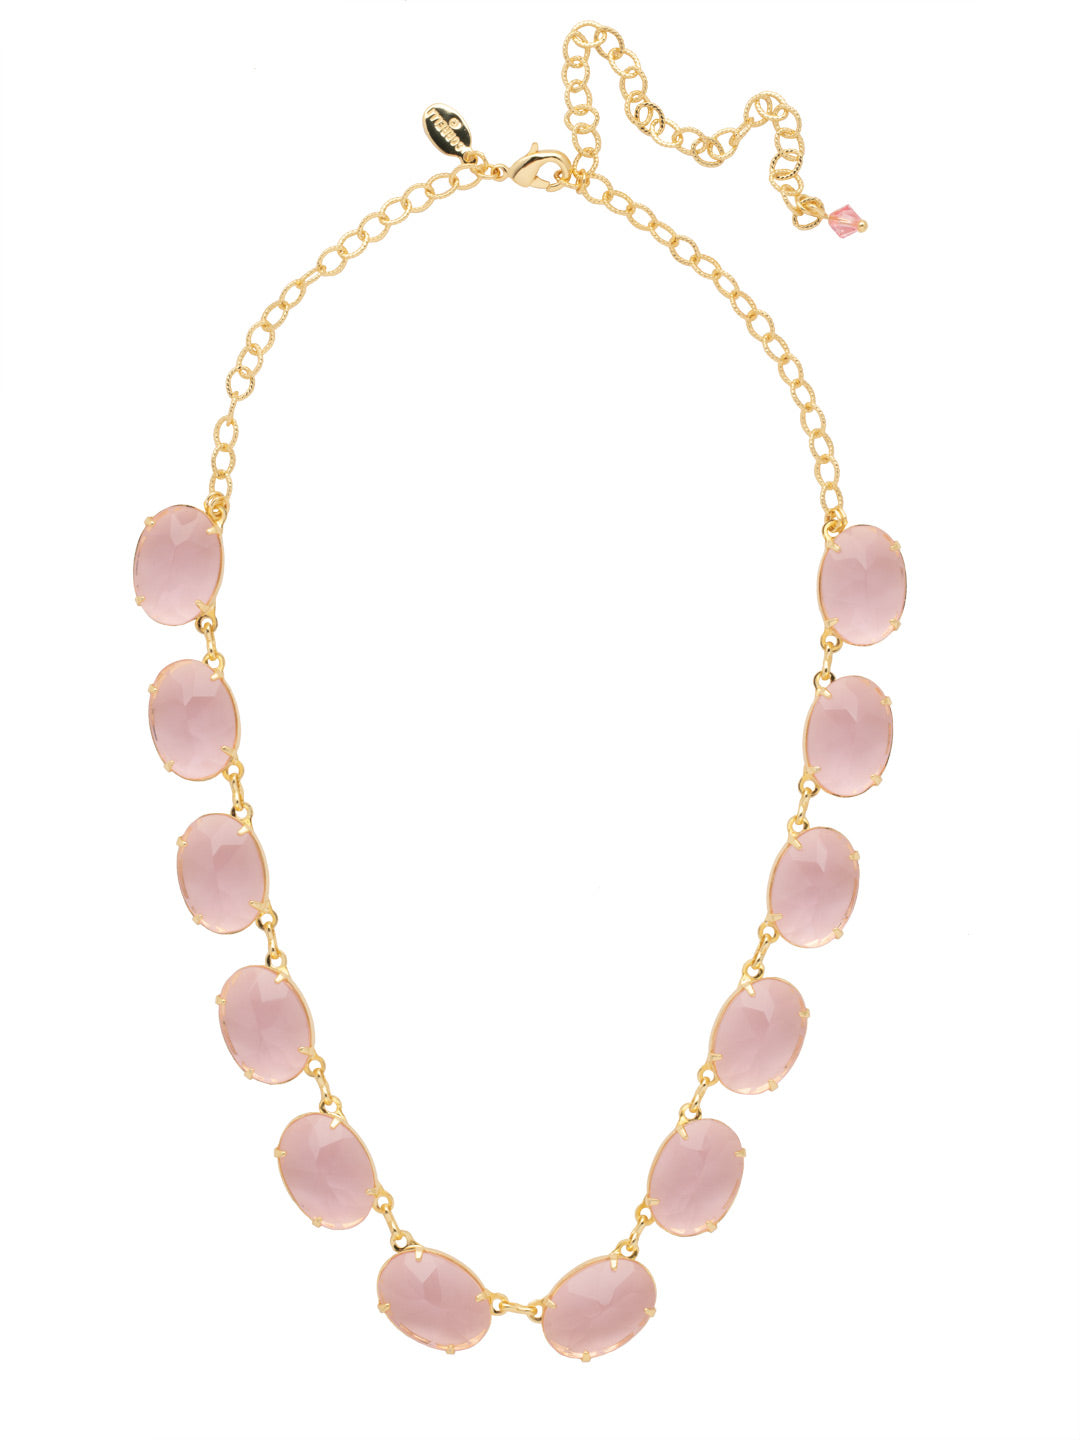 Julianna Oval Statement Necklace - NFD76BGFSK - <p>The Julianna Oval Statement Necklace features a row of open back round candy drop crystals around an adjustable chain, secured with a lobster claw clasp. From Sorrelli's First Kiss collection in our Bright Gold-tone finish.</p>